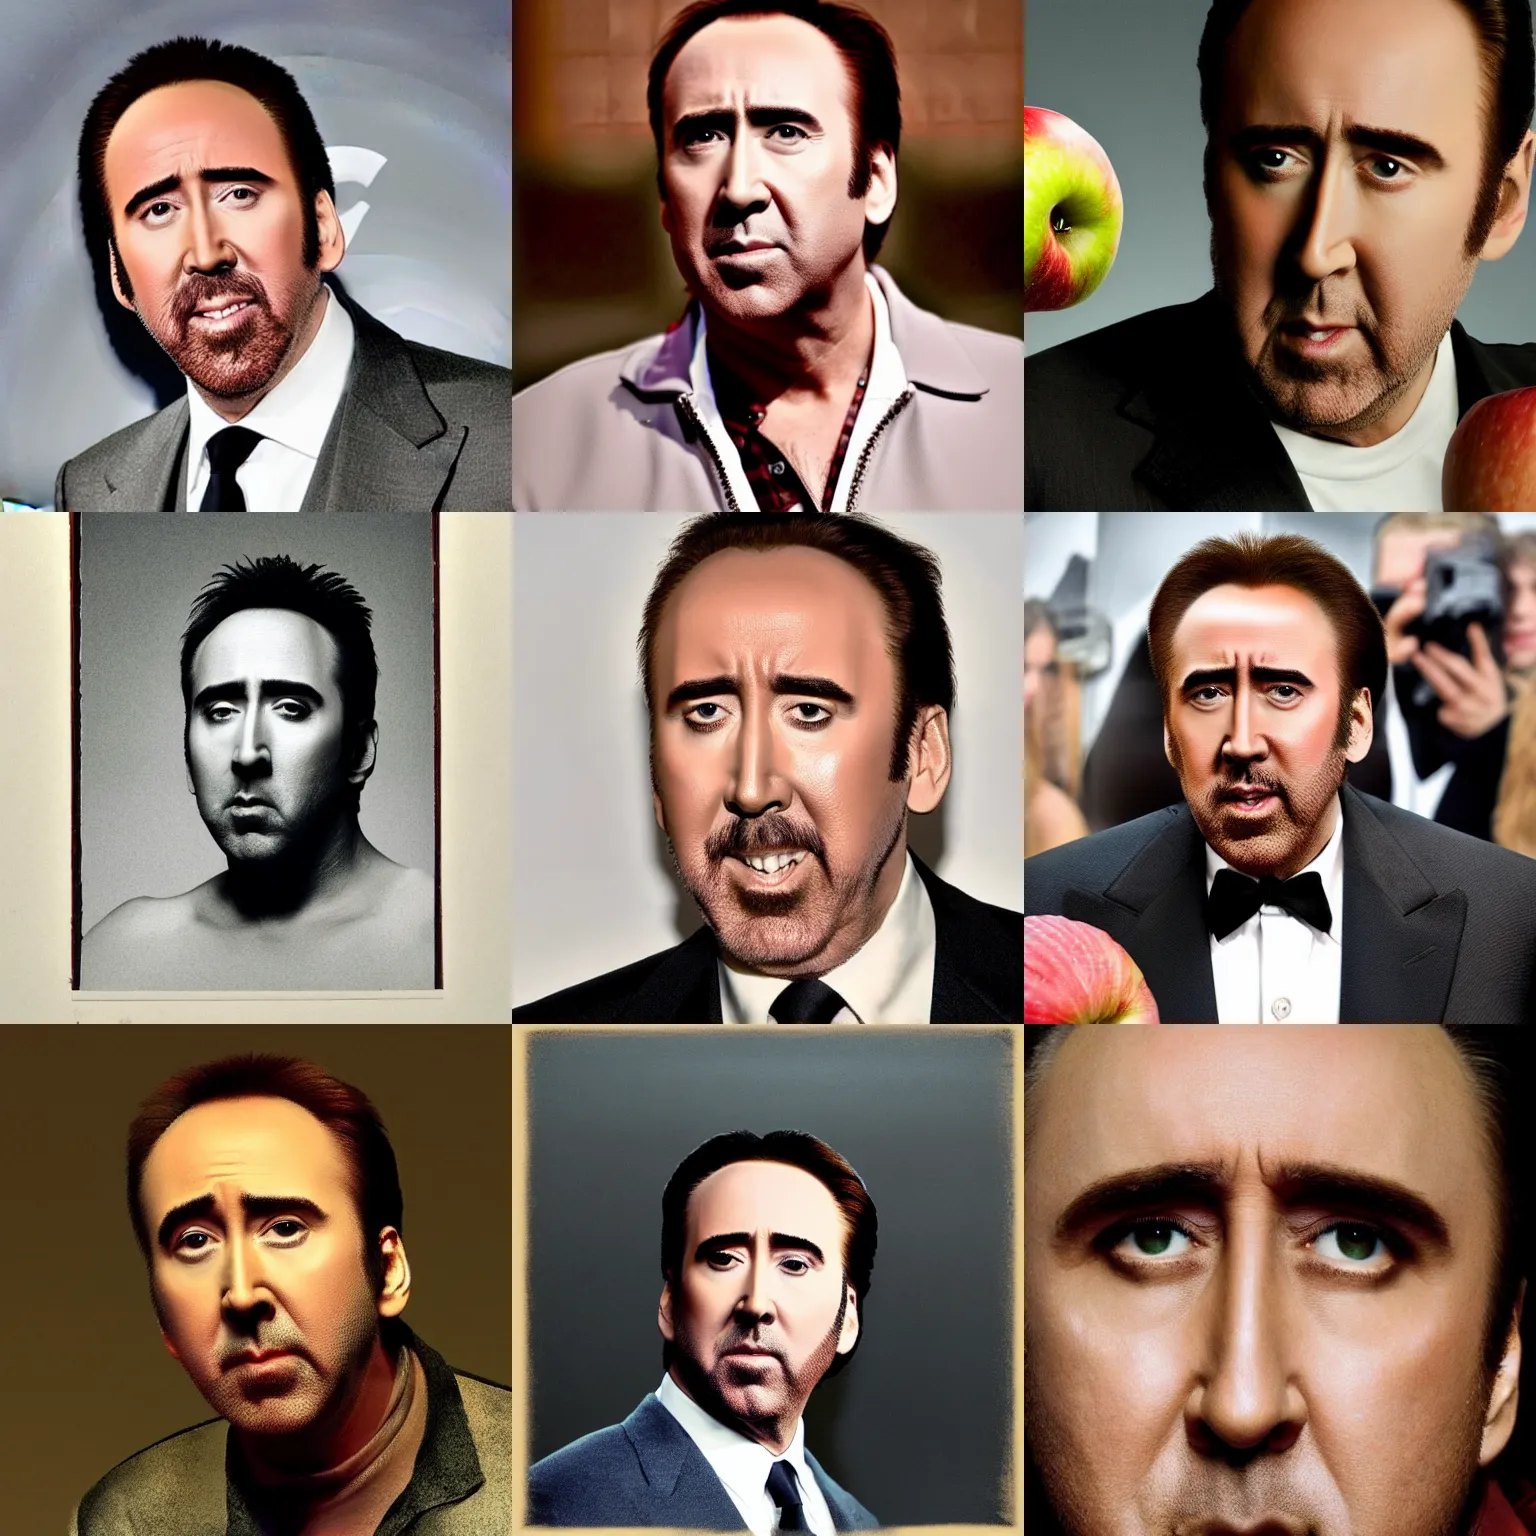 Prompt: An apple has Nicolas Cage's face, photograph